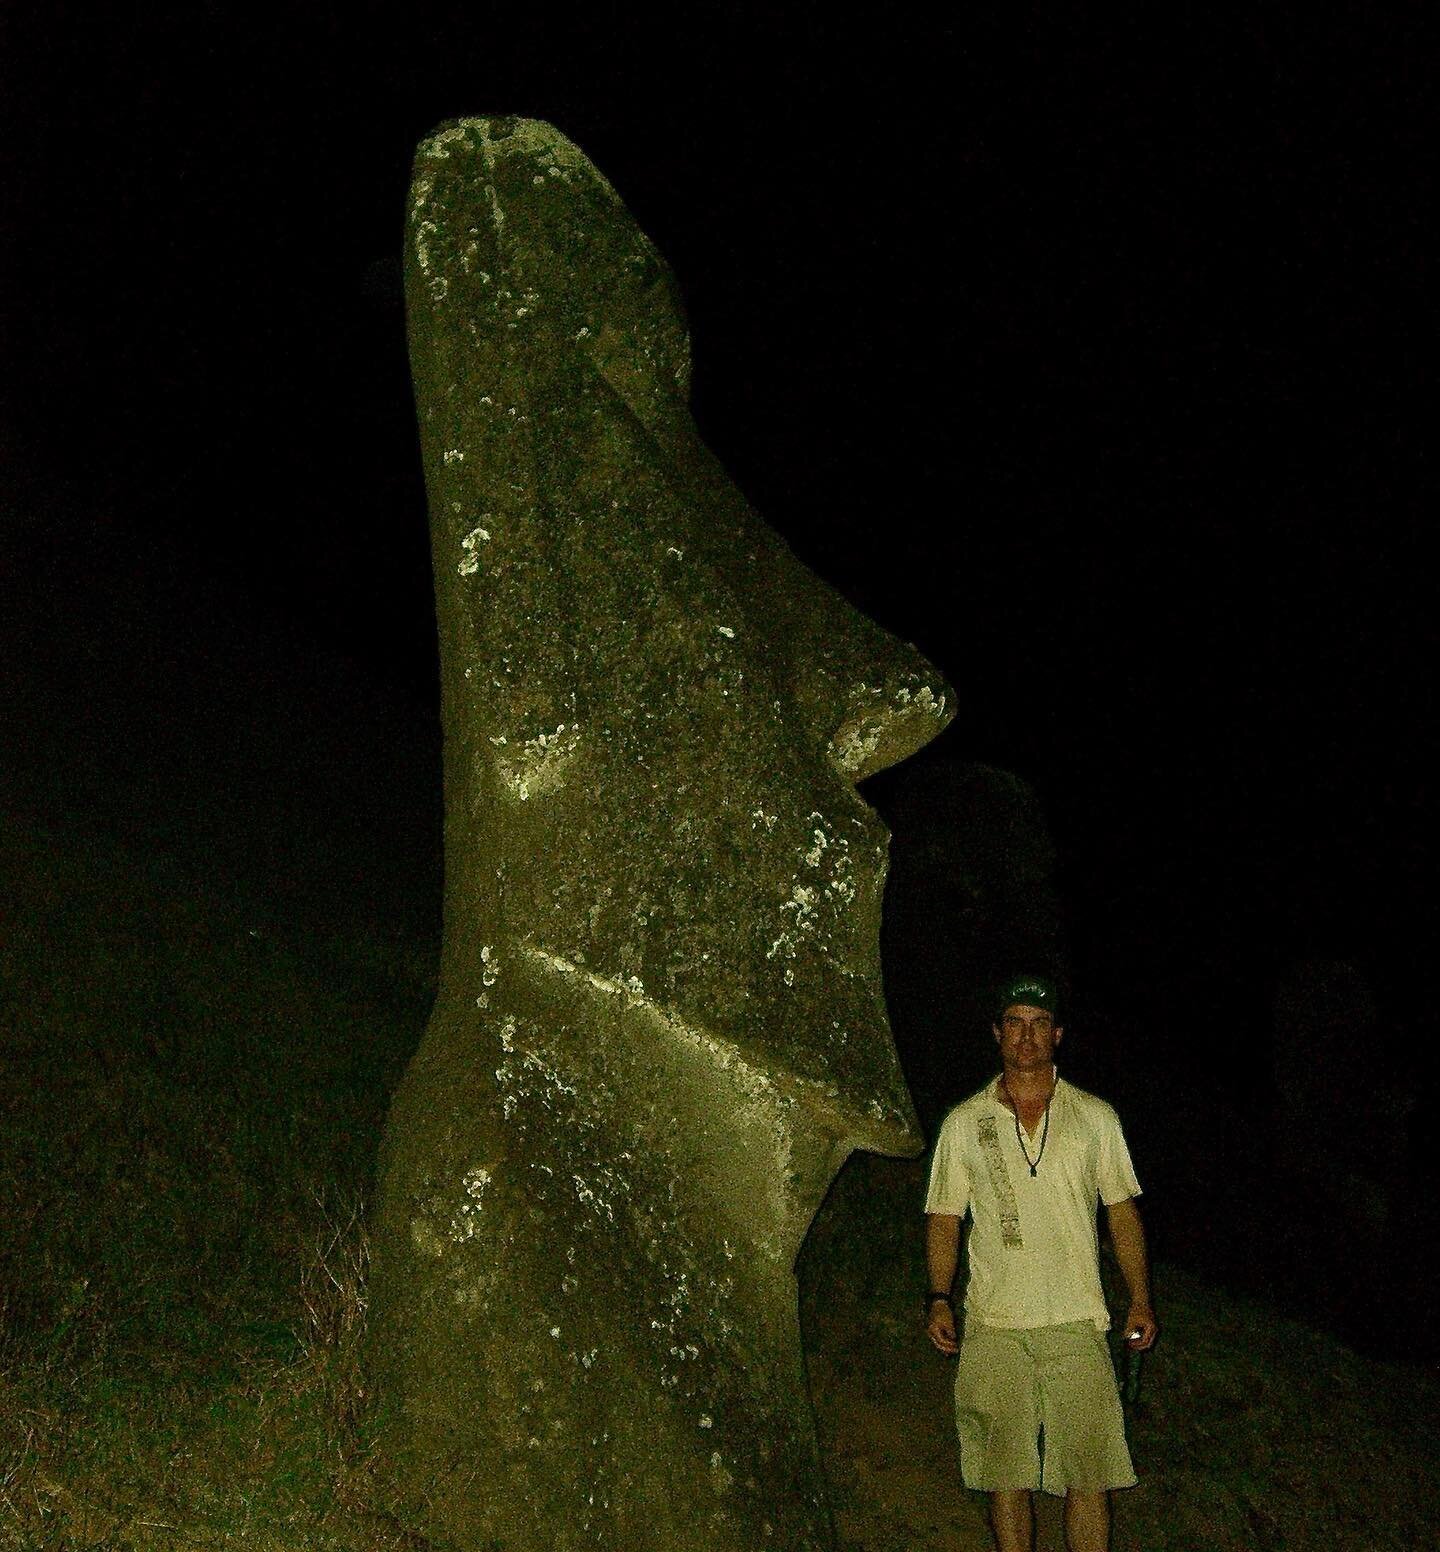 Back in the Spring of 2007, Michael Thomas and I visited Rapa Nui. Quite an adventure! Going adrift in the far southern corner of the Polynesian Triangle.